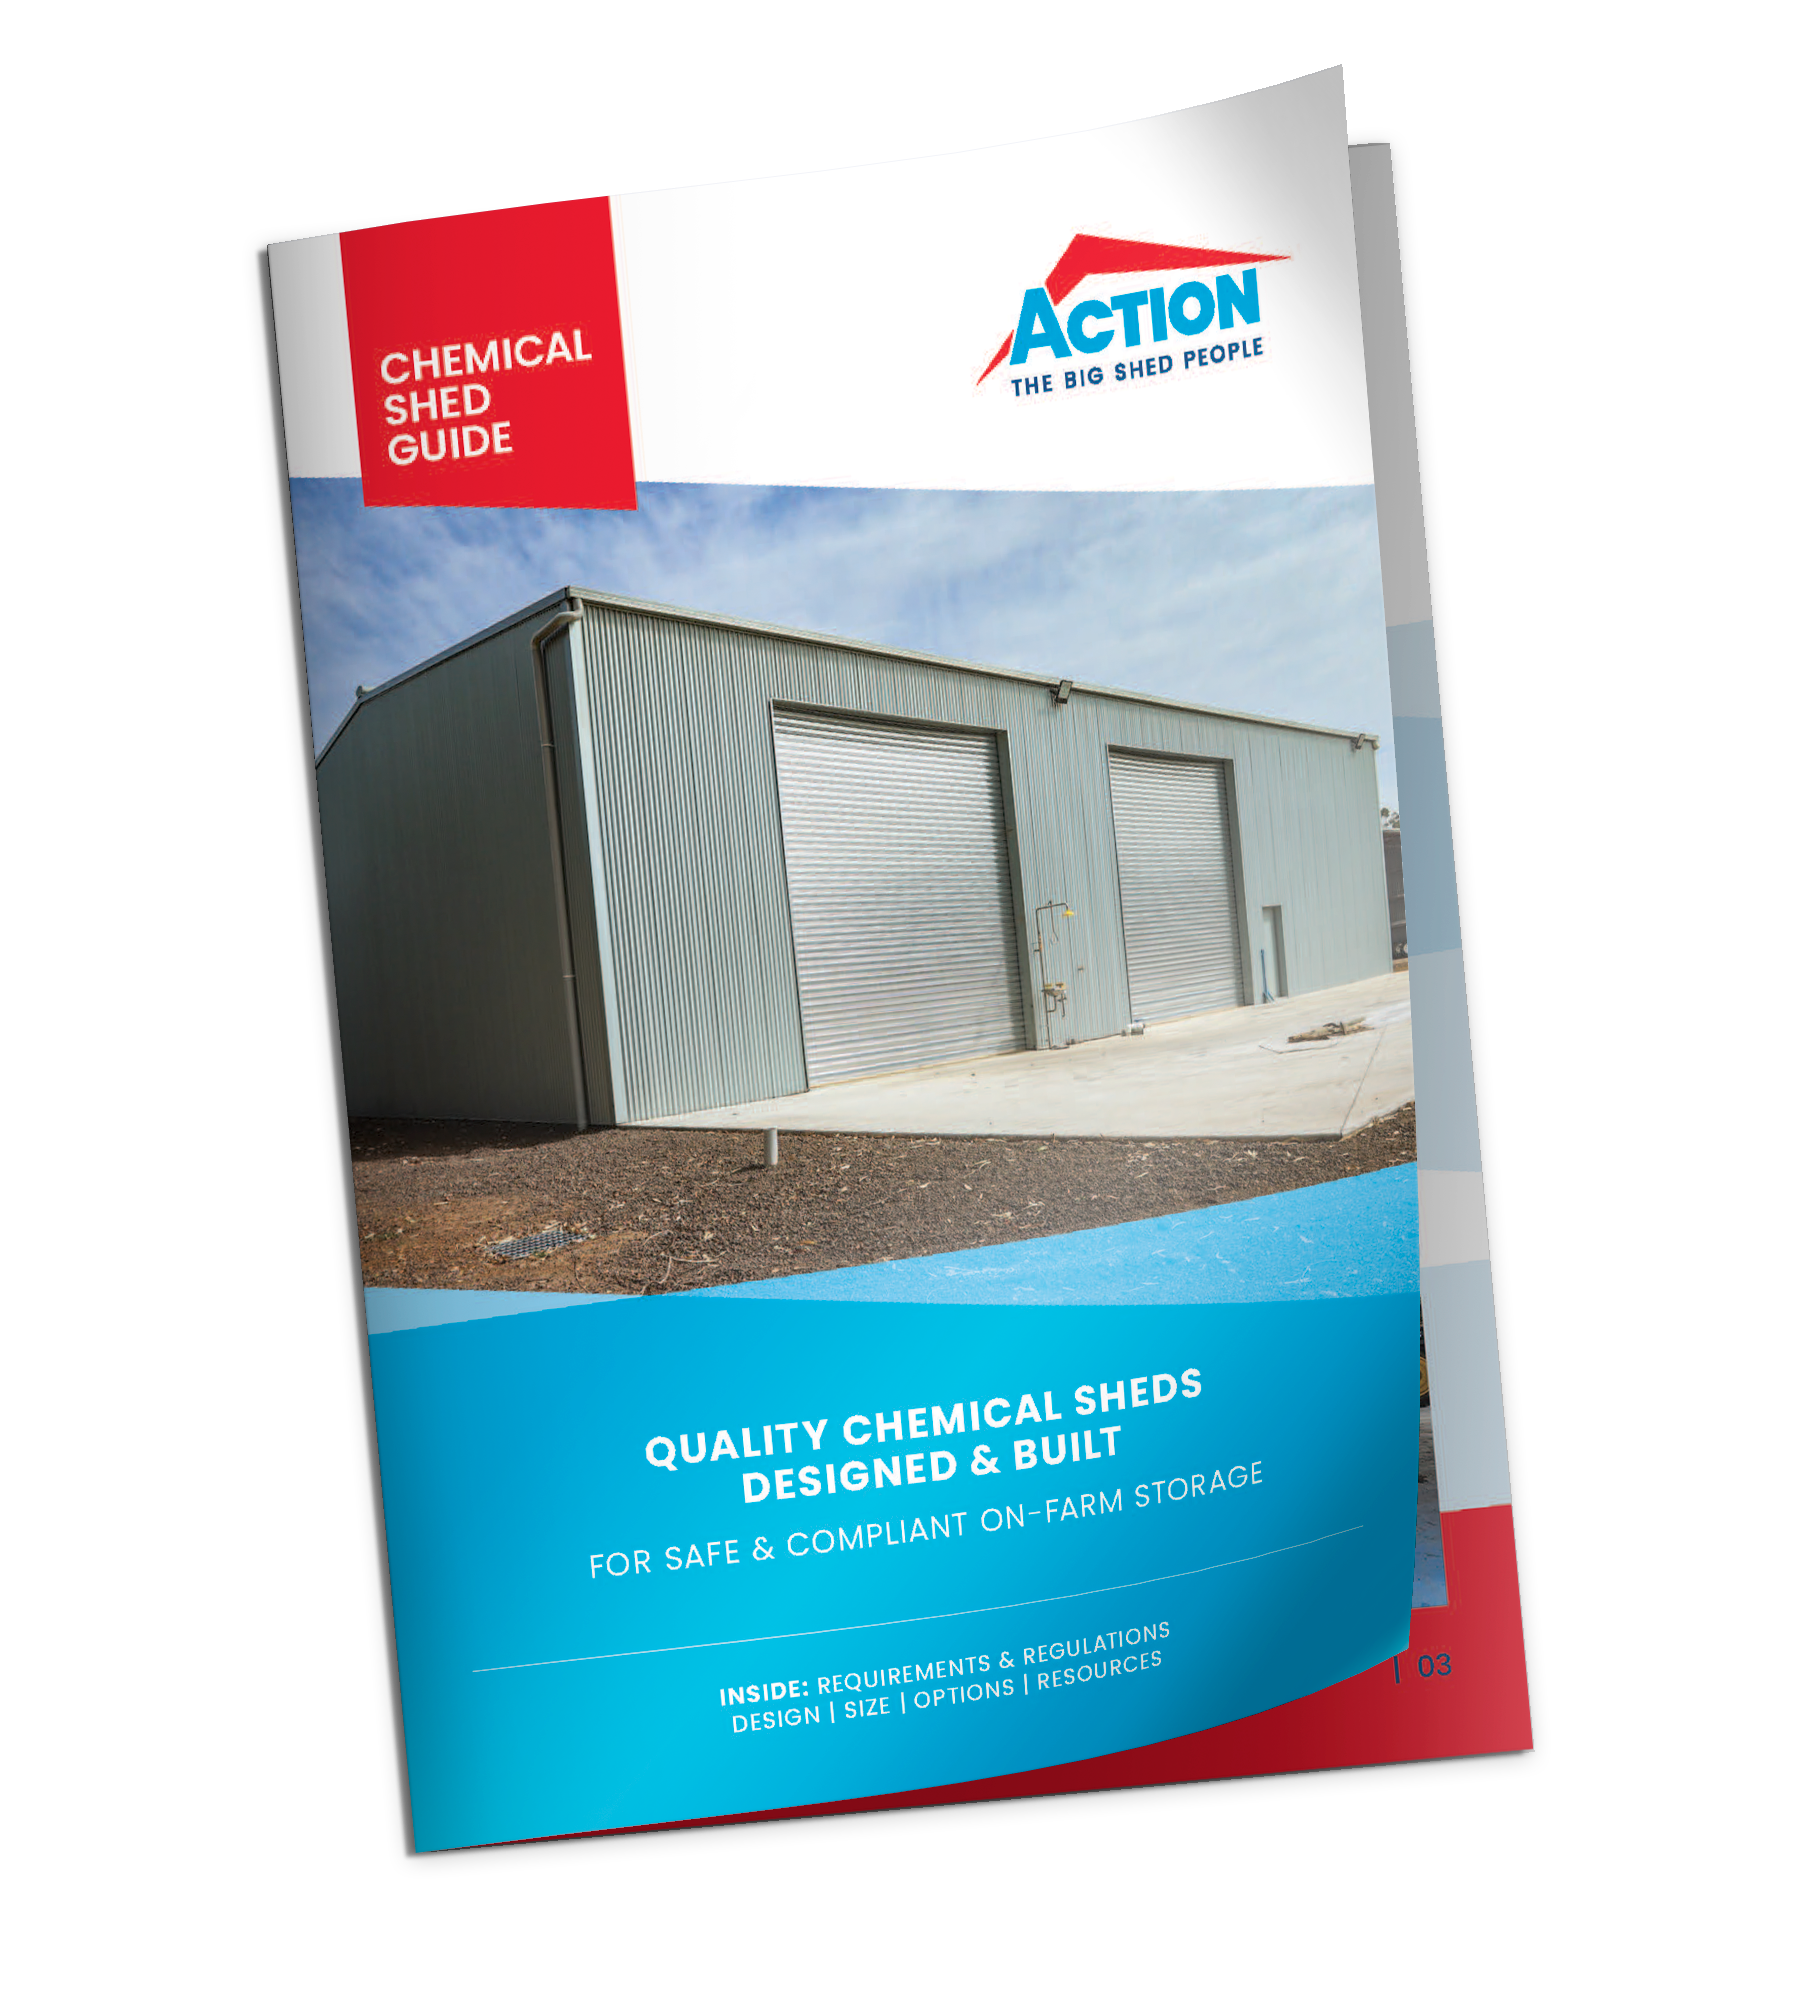 On-Farm Chemical Shed